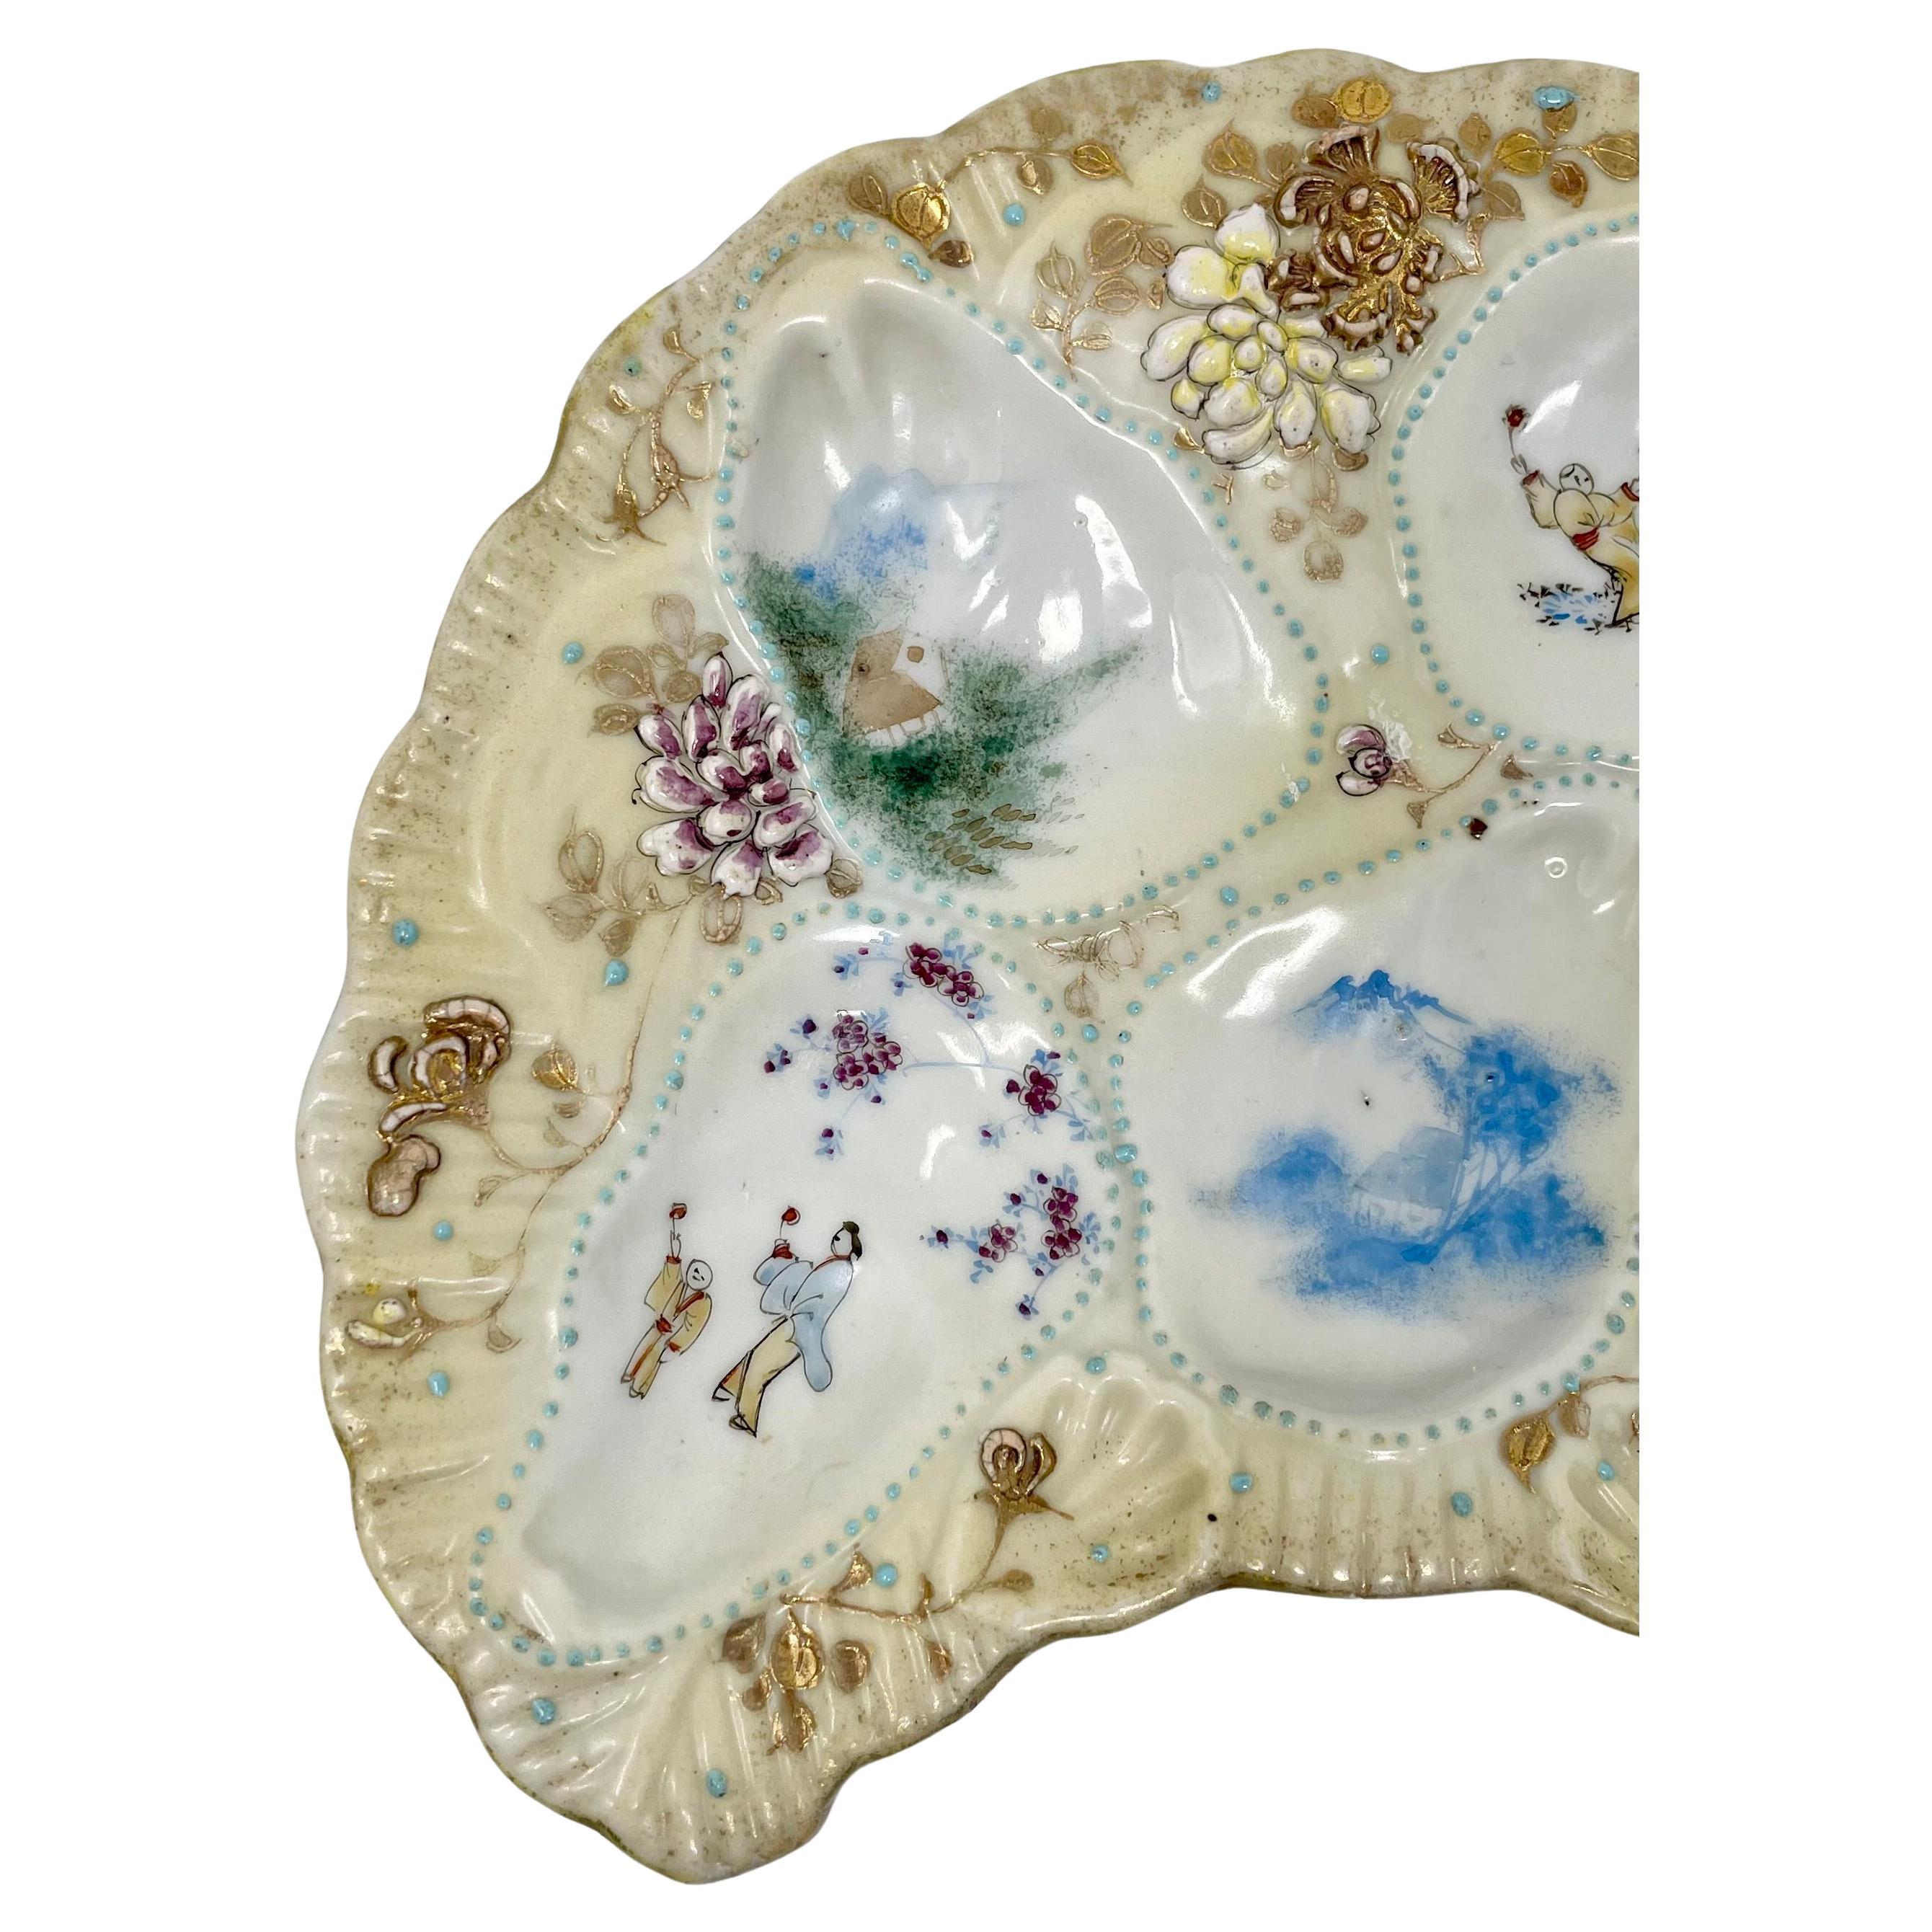 Antique Japanese Kutani Porcelain Crescent-Shaped Jeweled Oyster Plate, Ca. 1890 In Good Condition For Sale In New Orleans, LA